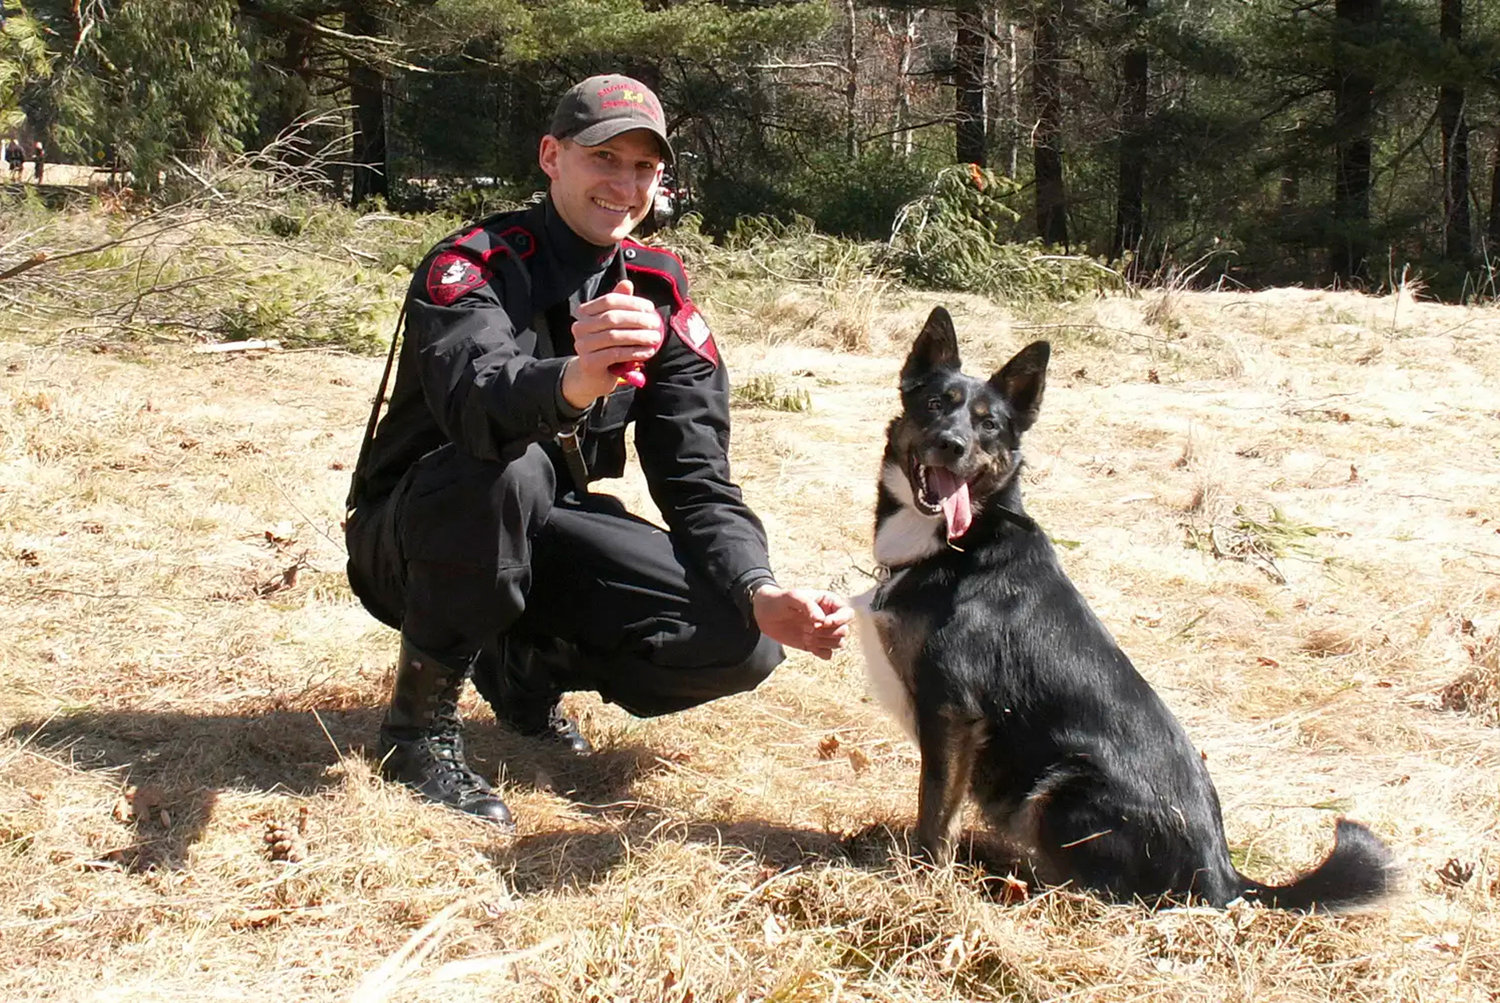 Corporal Dan O’Neill and K-9 Ruby